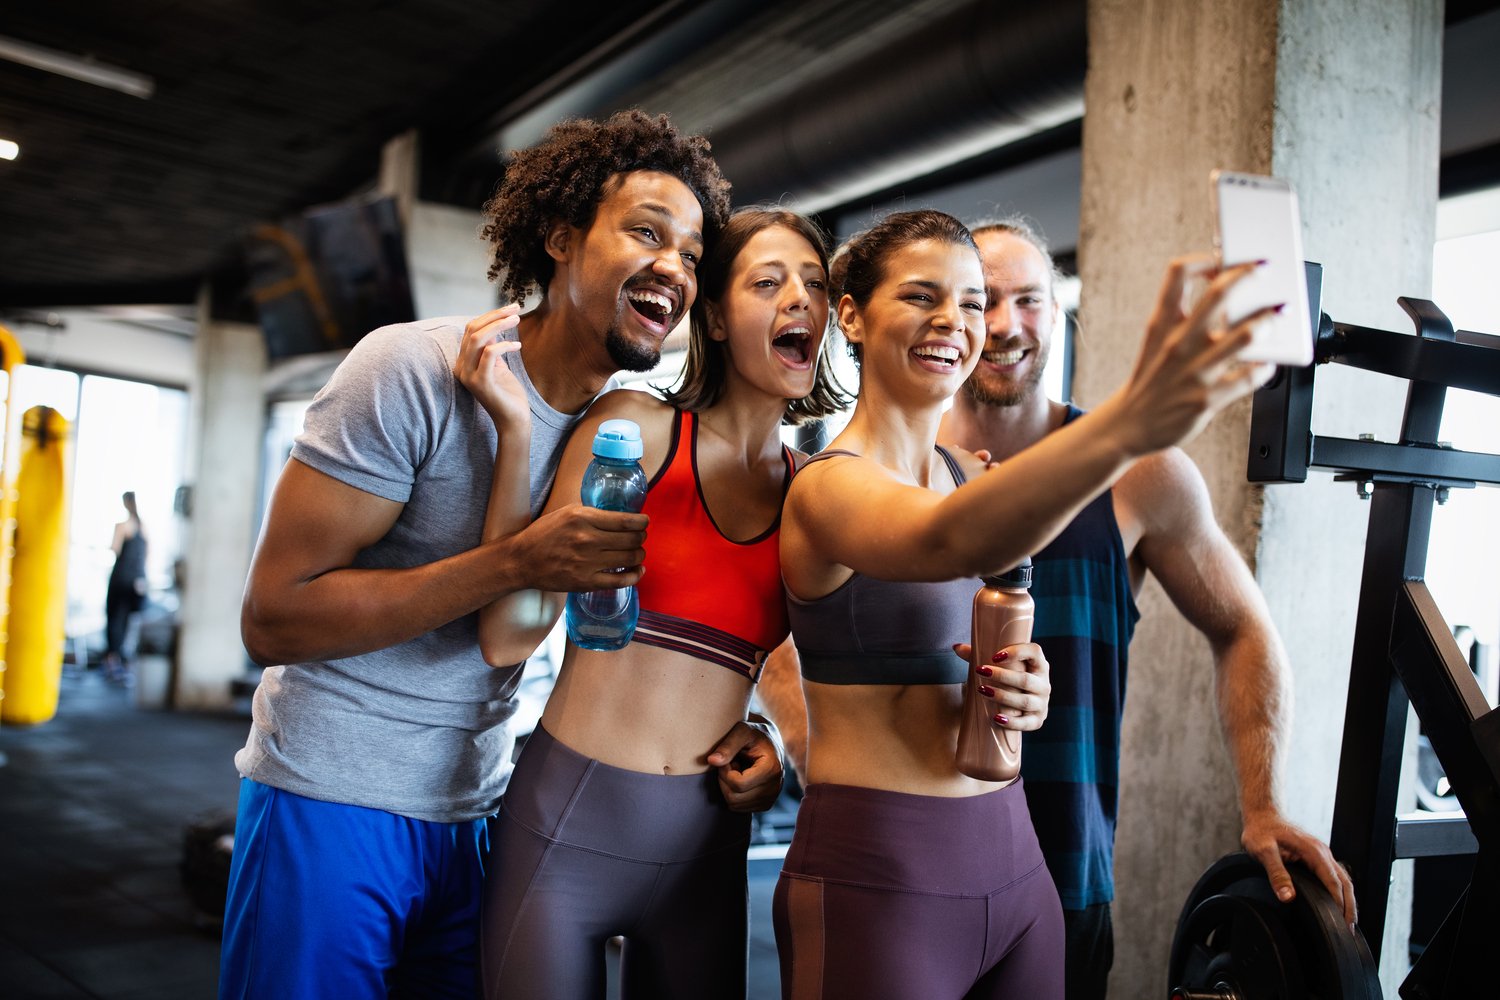 friends-making-selfie-in-the-gym-after-workout-2021-08-30-02-33-46-utc